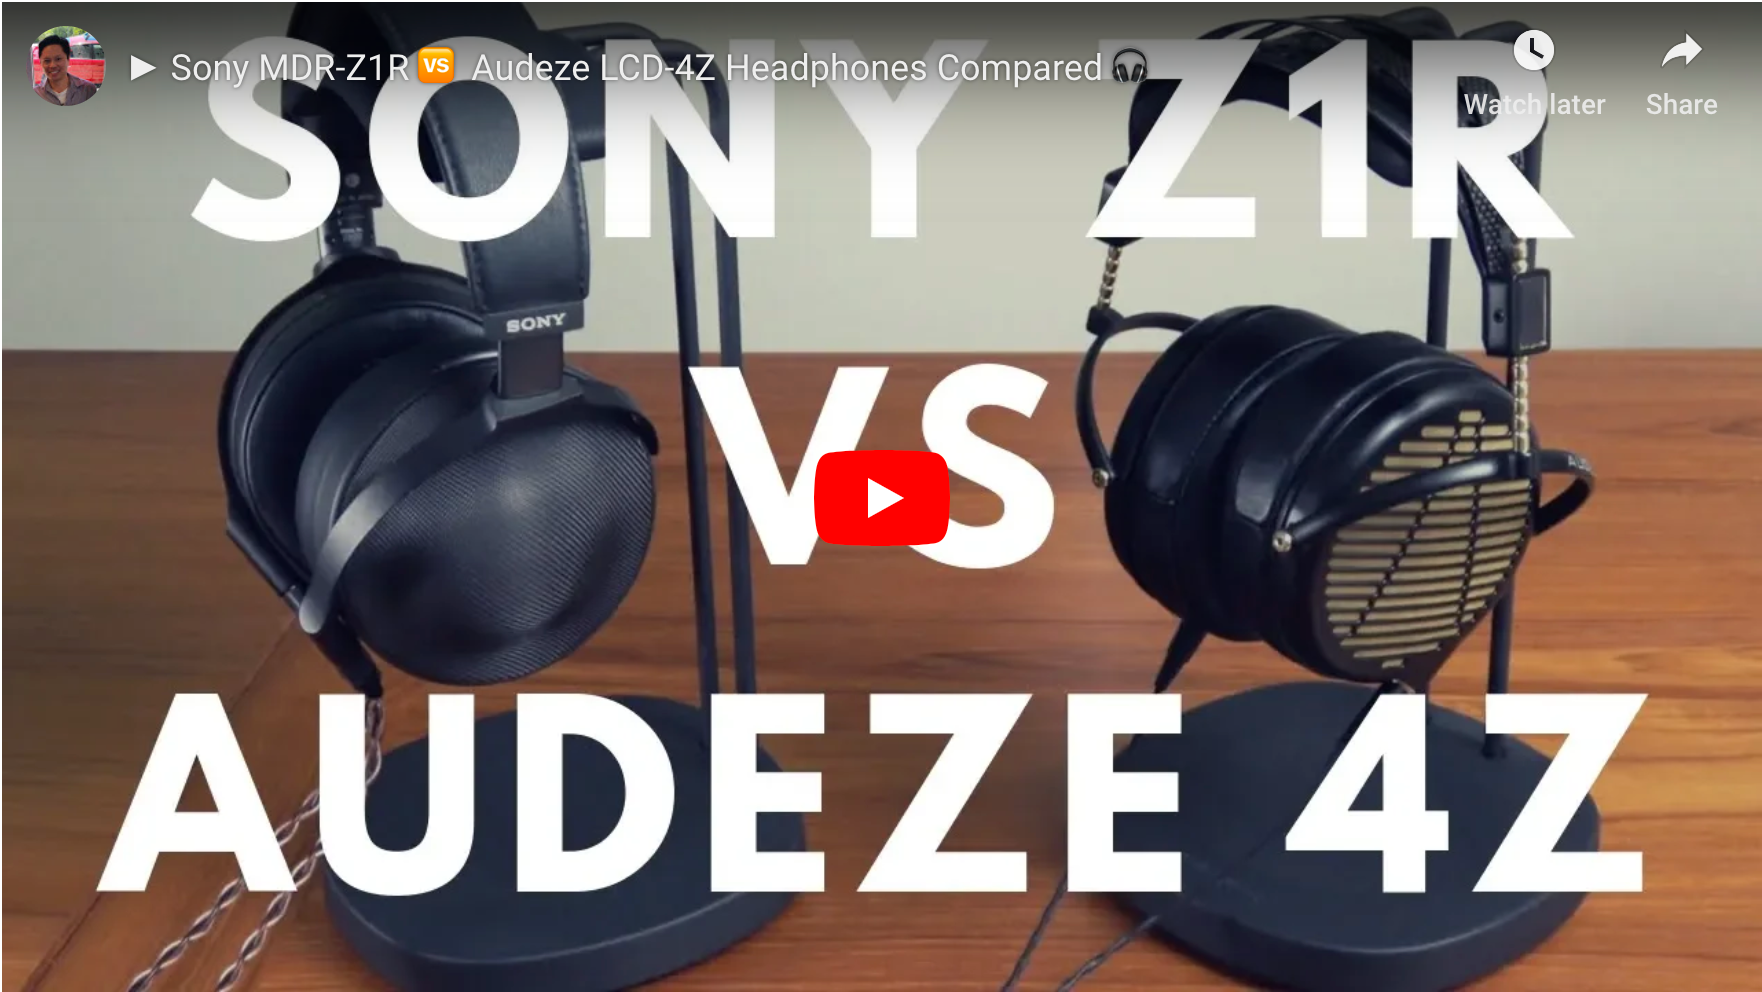 Mediahound compares the LCD-4z with the Sony MDR-Z1R